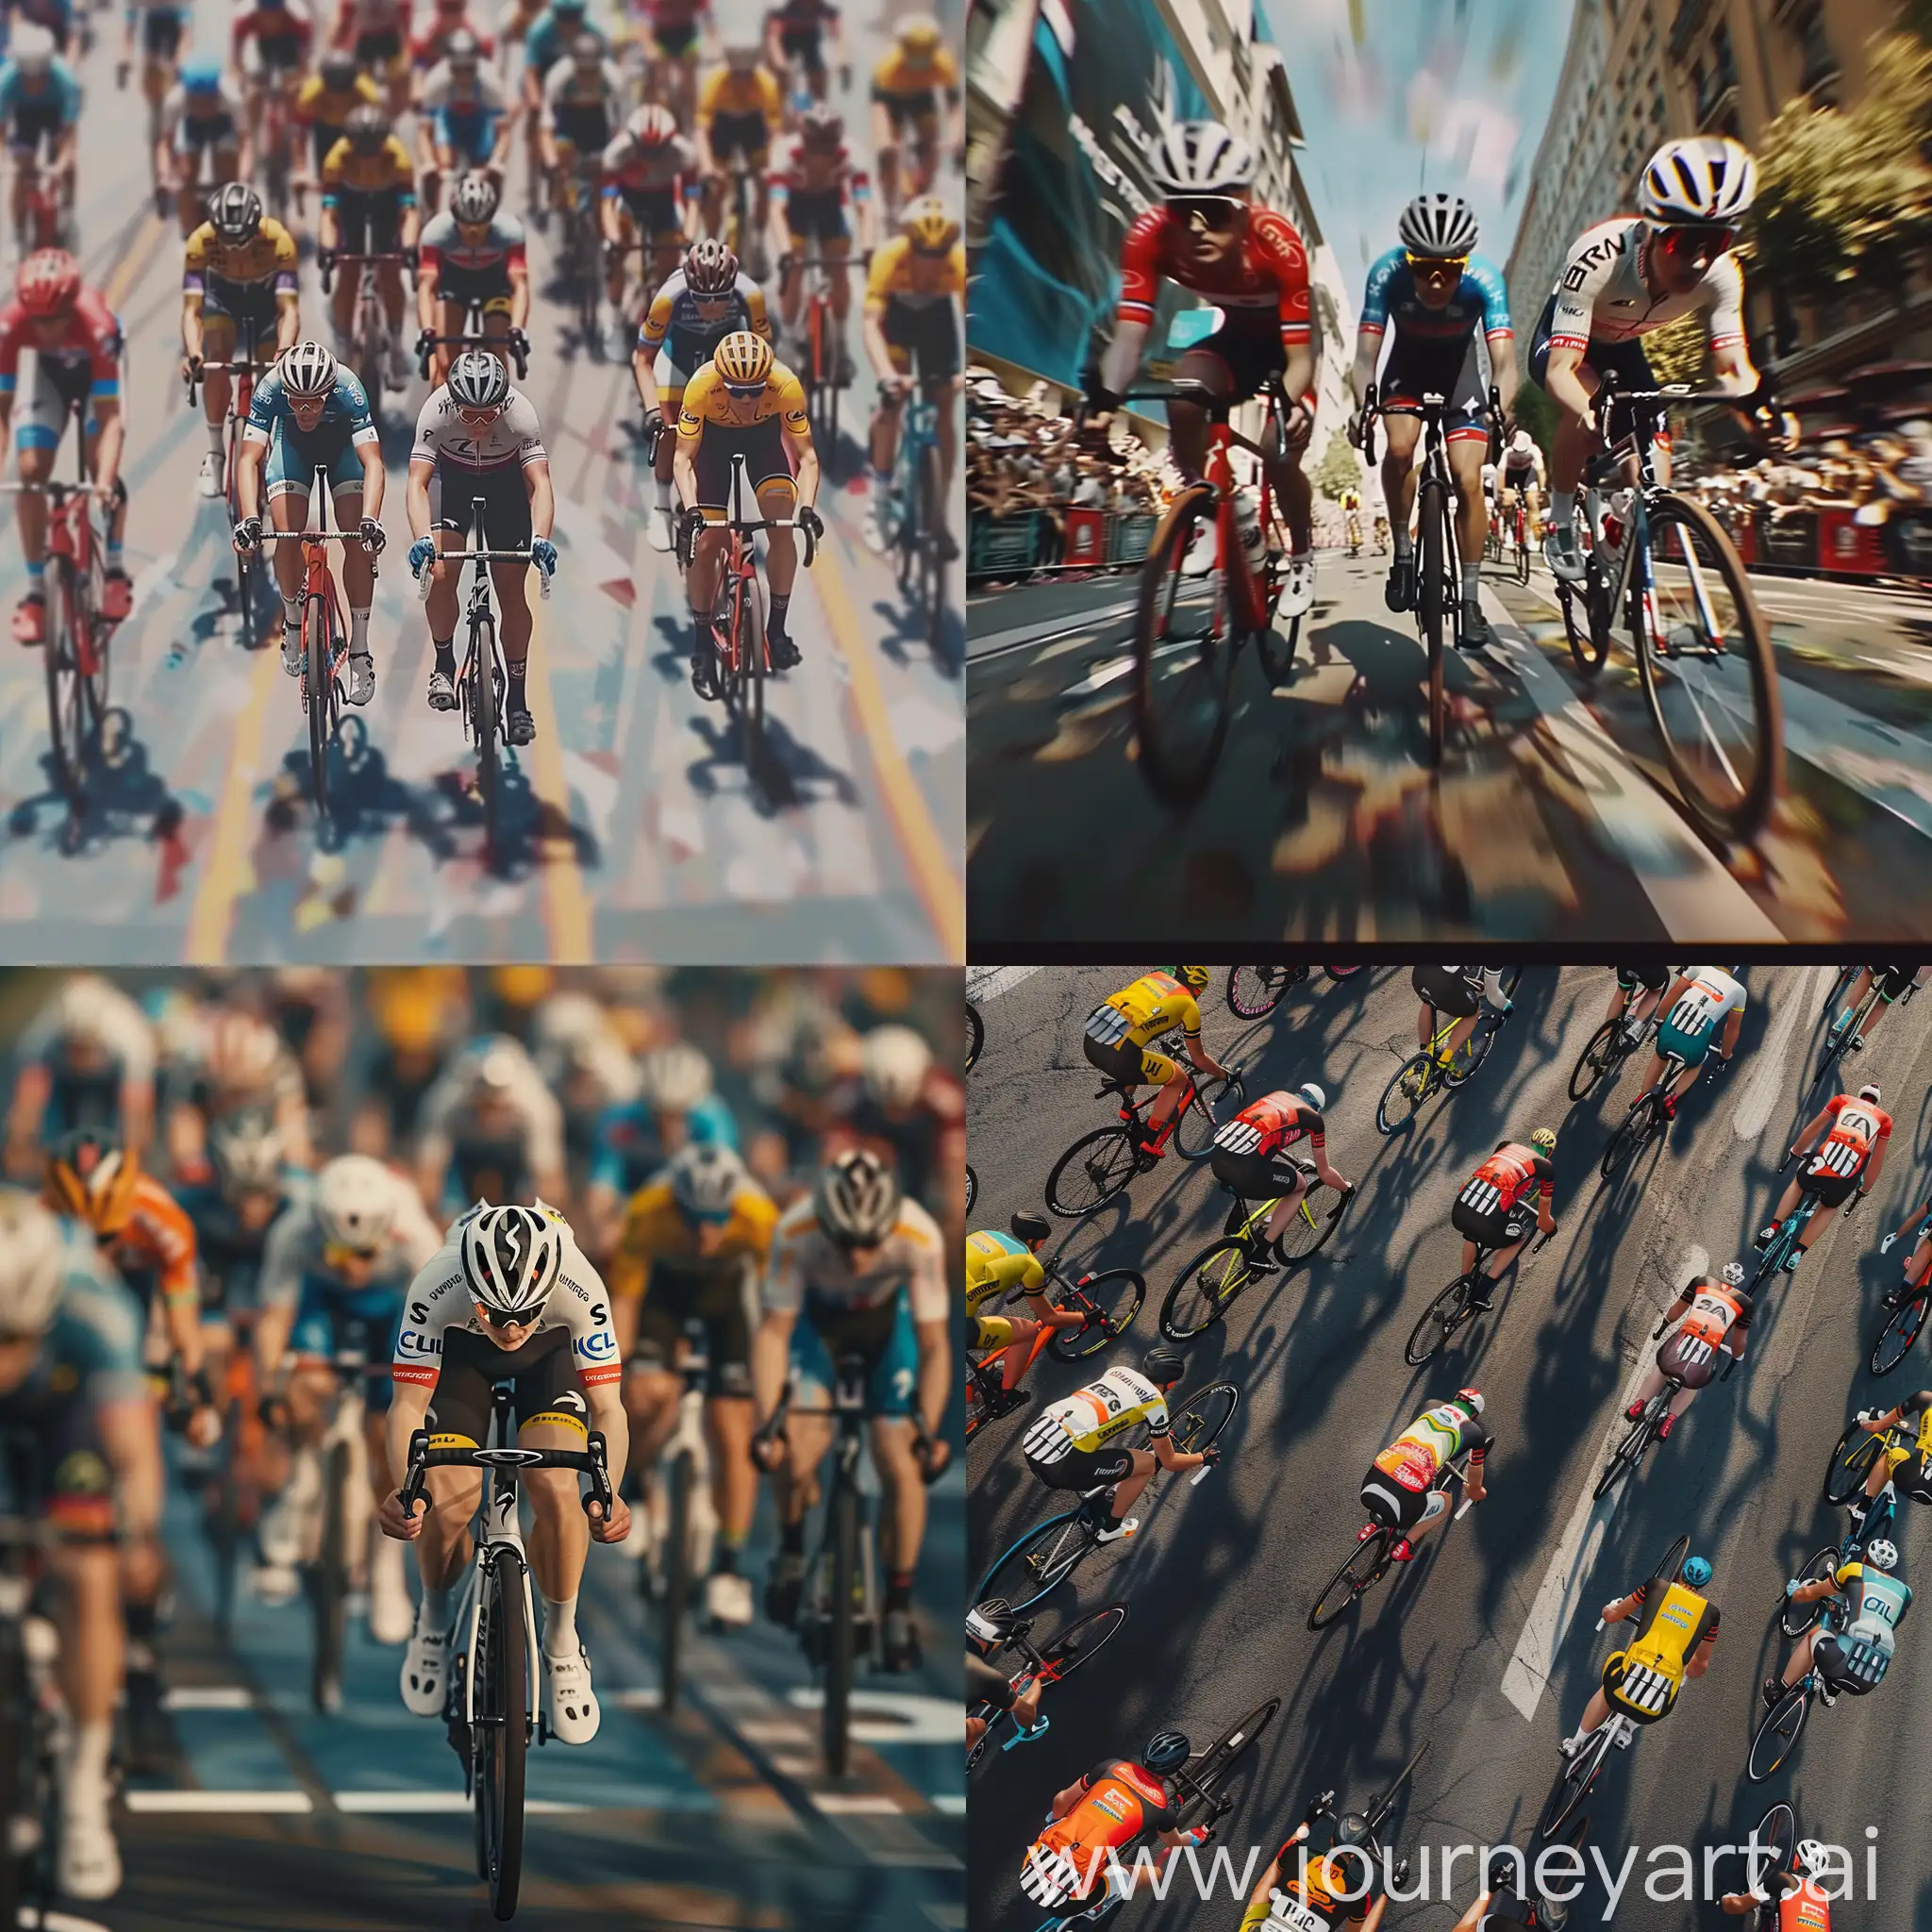 a realistic photo of a Include clips of professional cycling races from different perspectives, such as aerial shots, close-ups of participants, and shots from the sidelines.  [create a video for professional cycling]. use this image as an example [https://image.pollinations.ai/prompt/Include%20clips%20of%20professional%20cycling%20races%20from%20different%20perspectives,%20such%20as%20aerial%20shots,%20close-ups%20of%20participants,%20and%20shots%20from%20the%20sidelines.%20create%20a%20video%20for%20professiona?nofeed=true&nologo=true] --ar 1:1 --stylize 750 --v 6